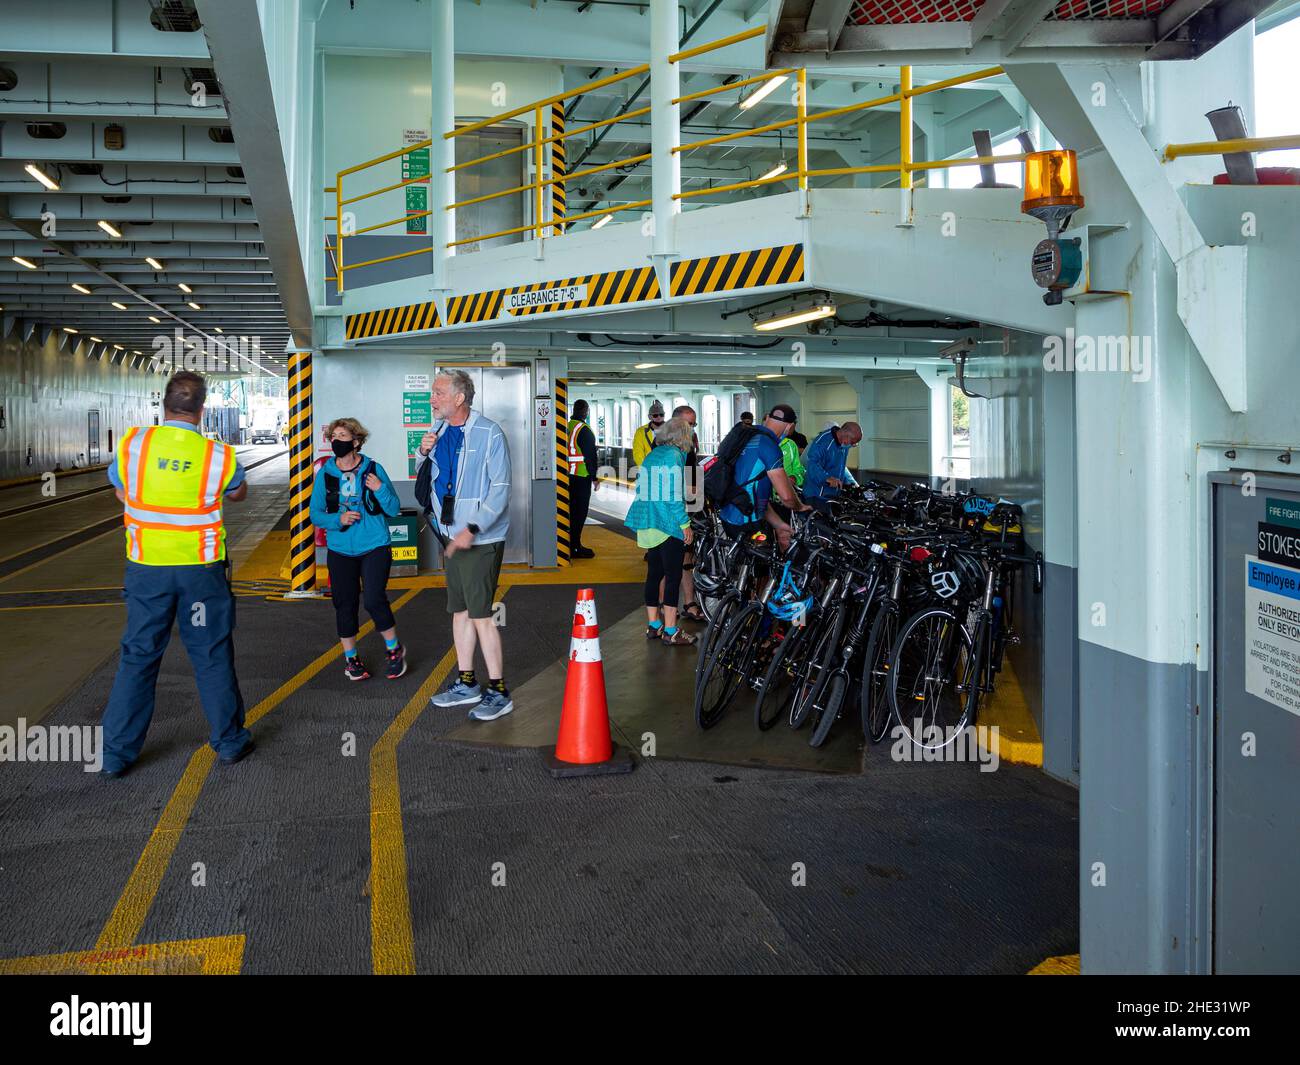 WA21013-00...WASHINGTON - Cyclists arranging their bicycles  as they bord a Washington State ferry at Anacortes on their way to Orcas Island, part of Stock Photo